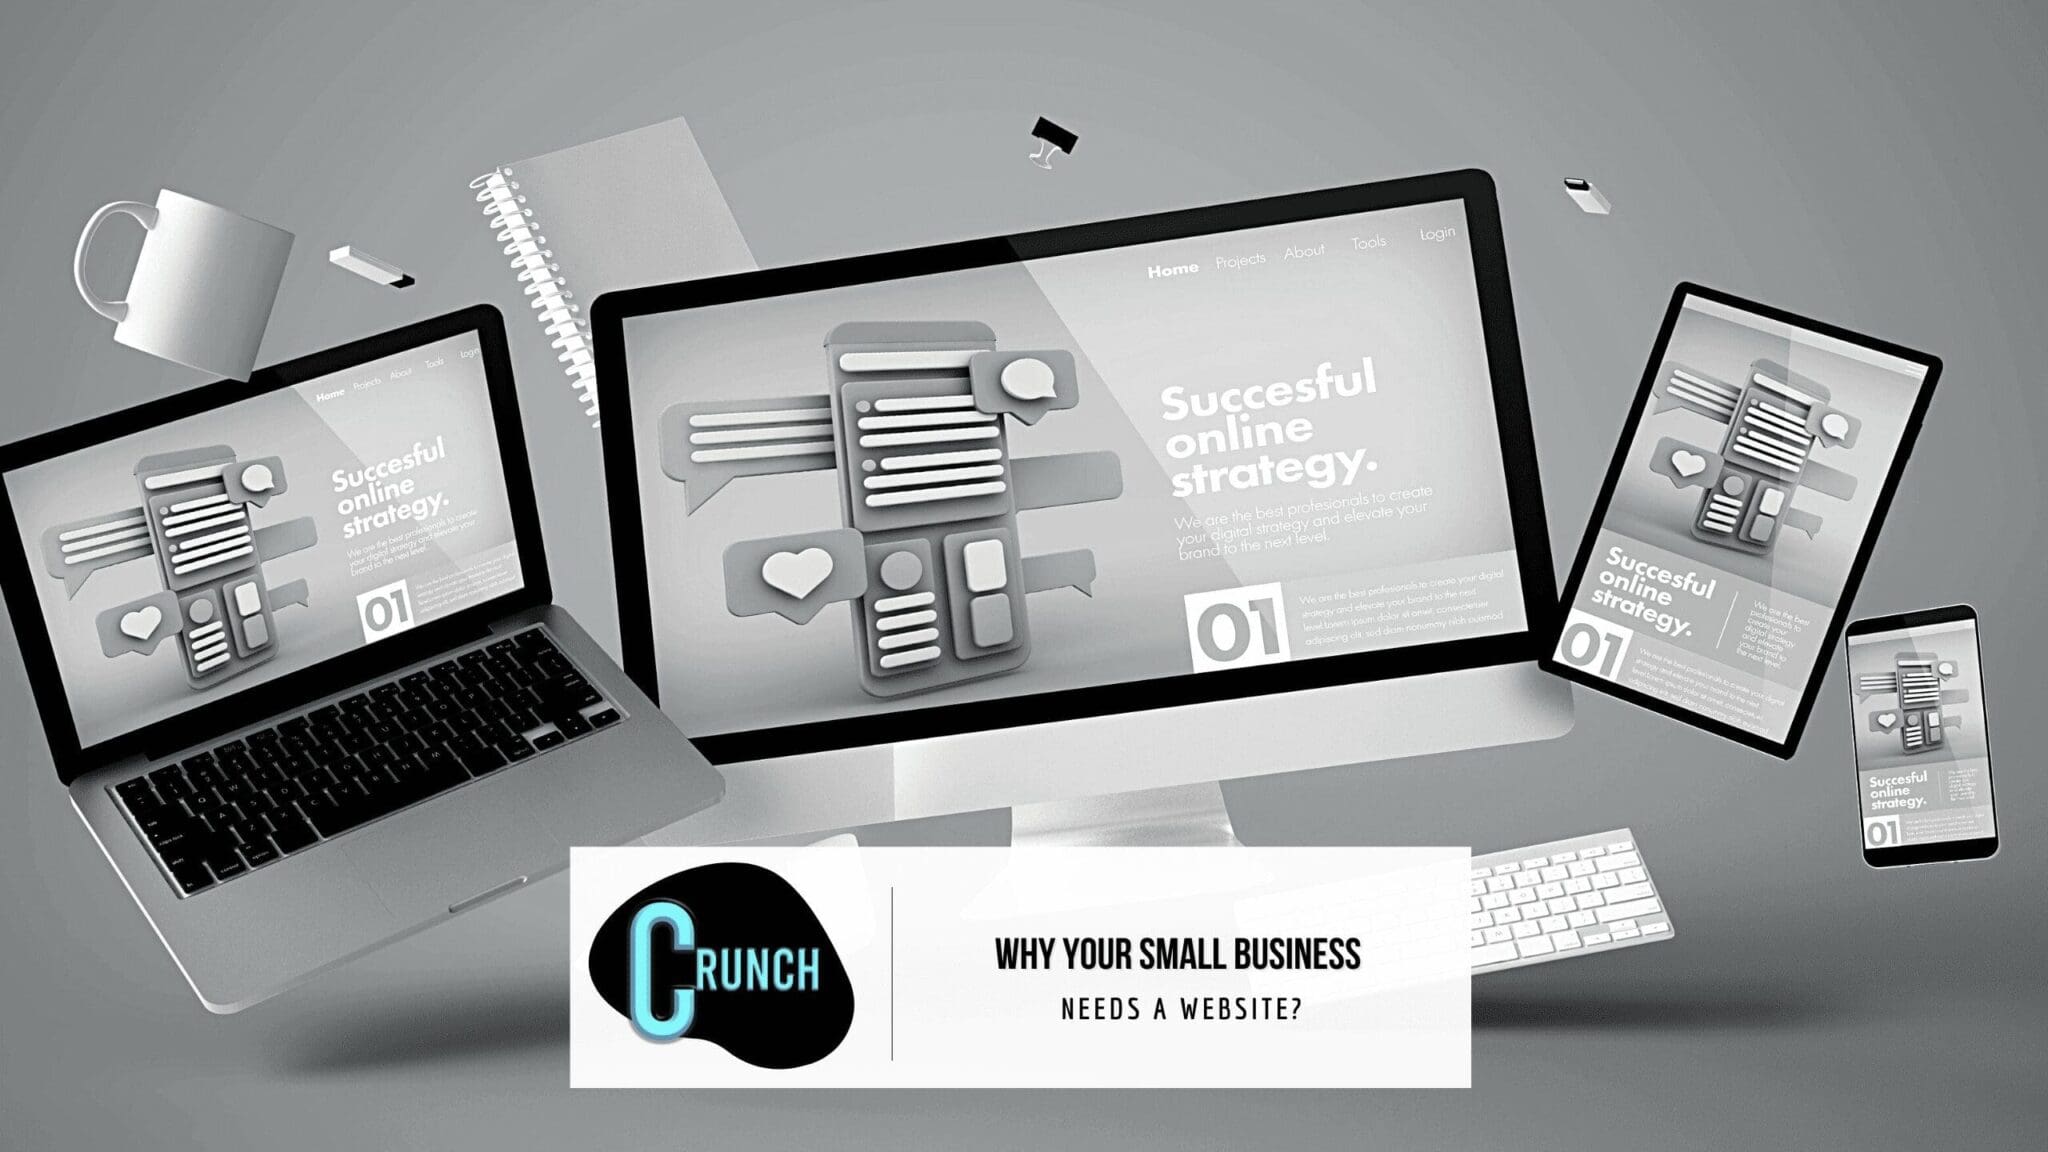 Why your small business needs a website